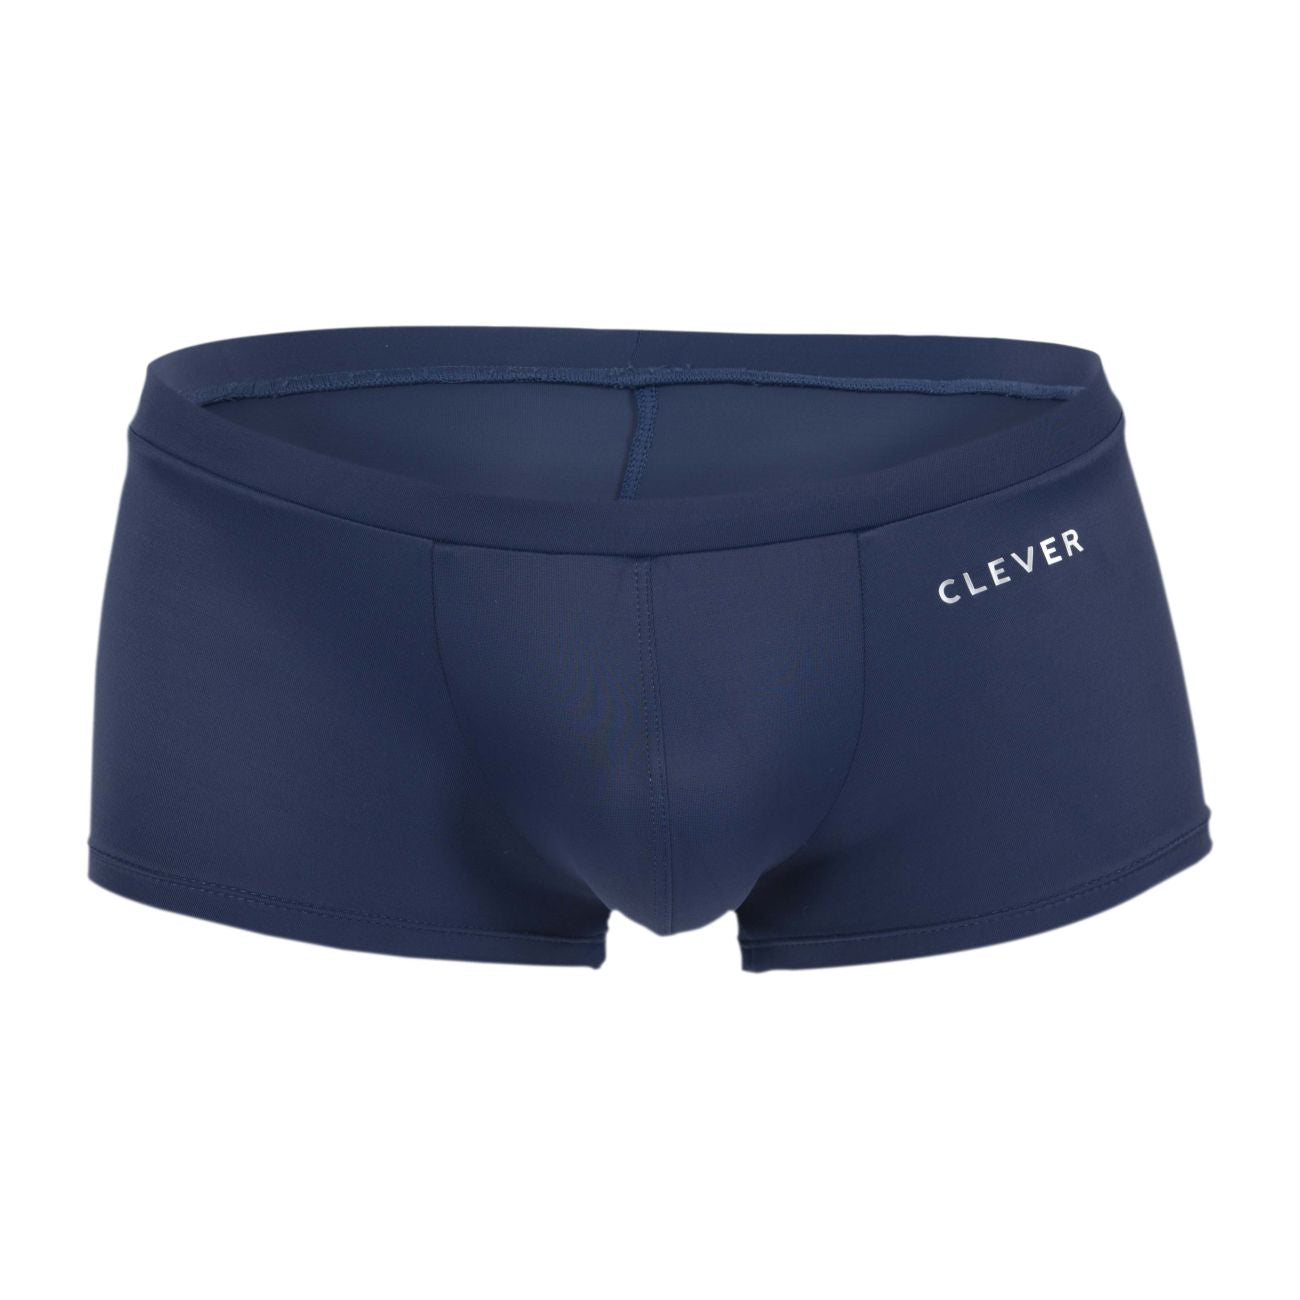 Clever 1451 Purity Trunks Dark Blue